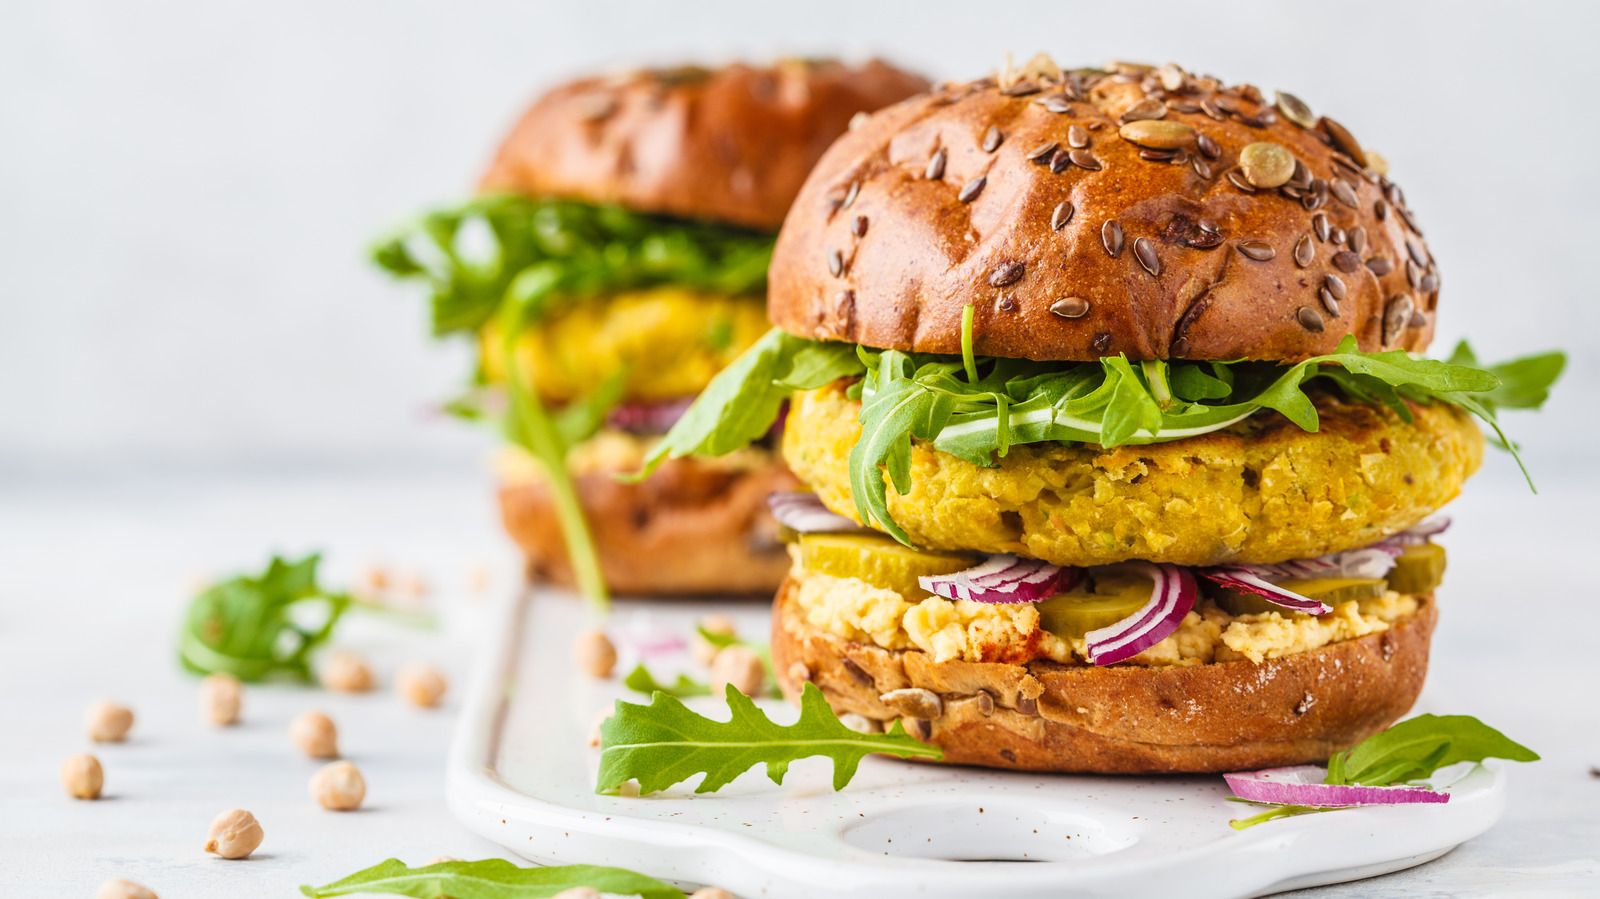 https://www.tastingtable.com/img/gallery/why-only-using-raw-vegetables-can-ruin-your-veggie-burger/l-intro-1655560500.jpg